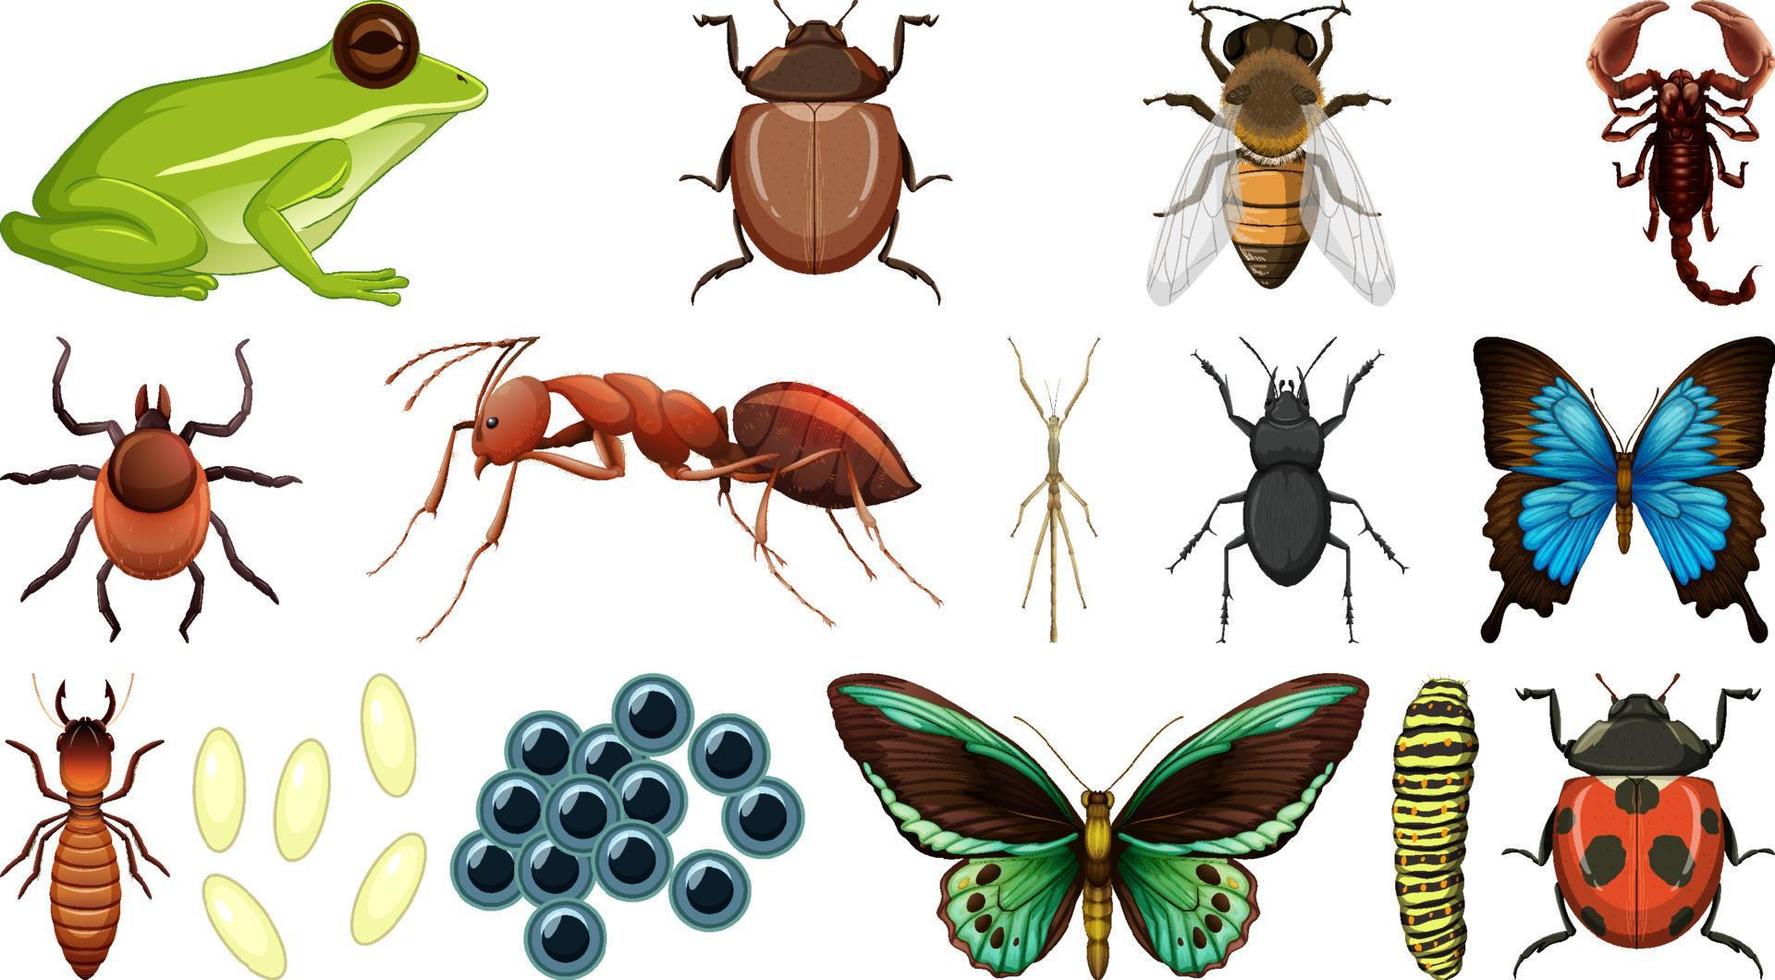 Different insects collection isolated on white background vector